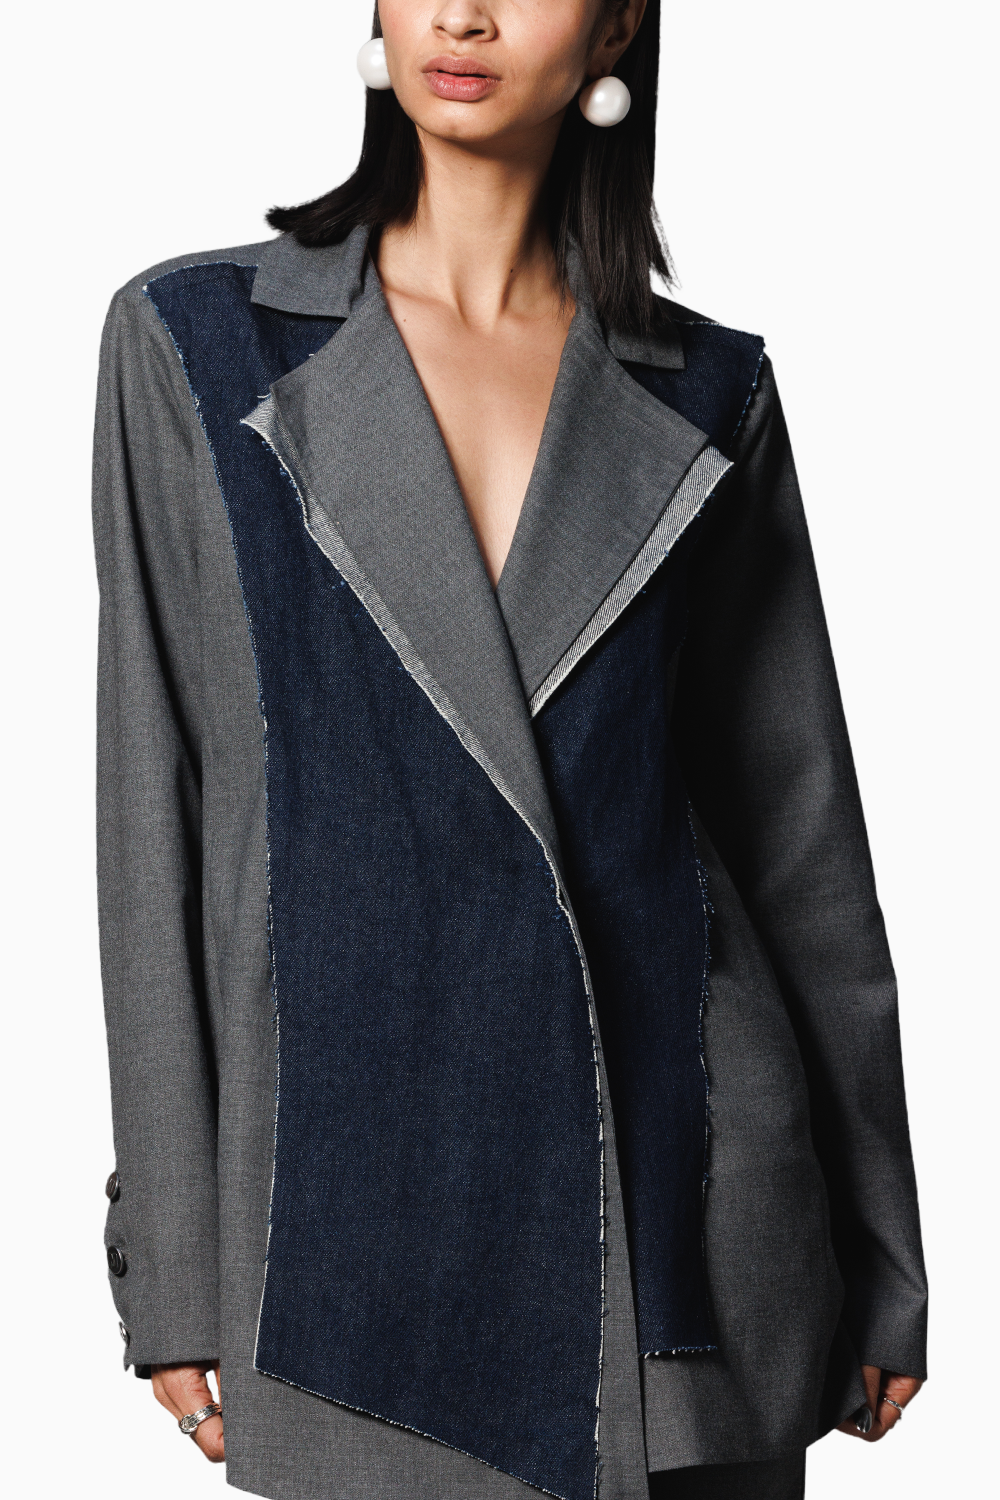 Grey Dual Panelled Blazer and Pants Suit